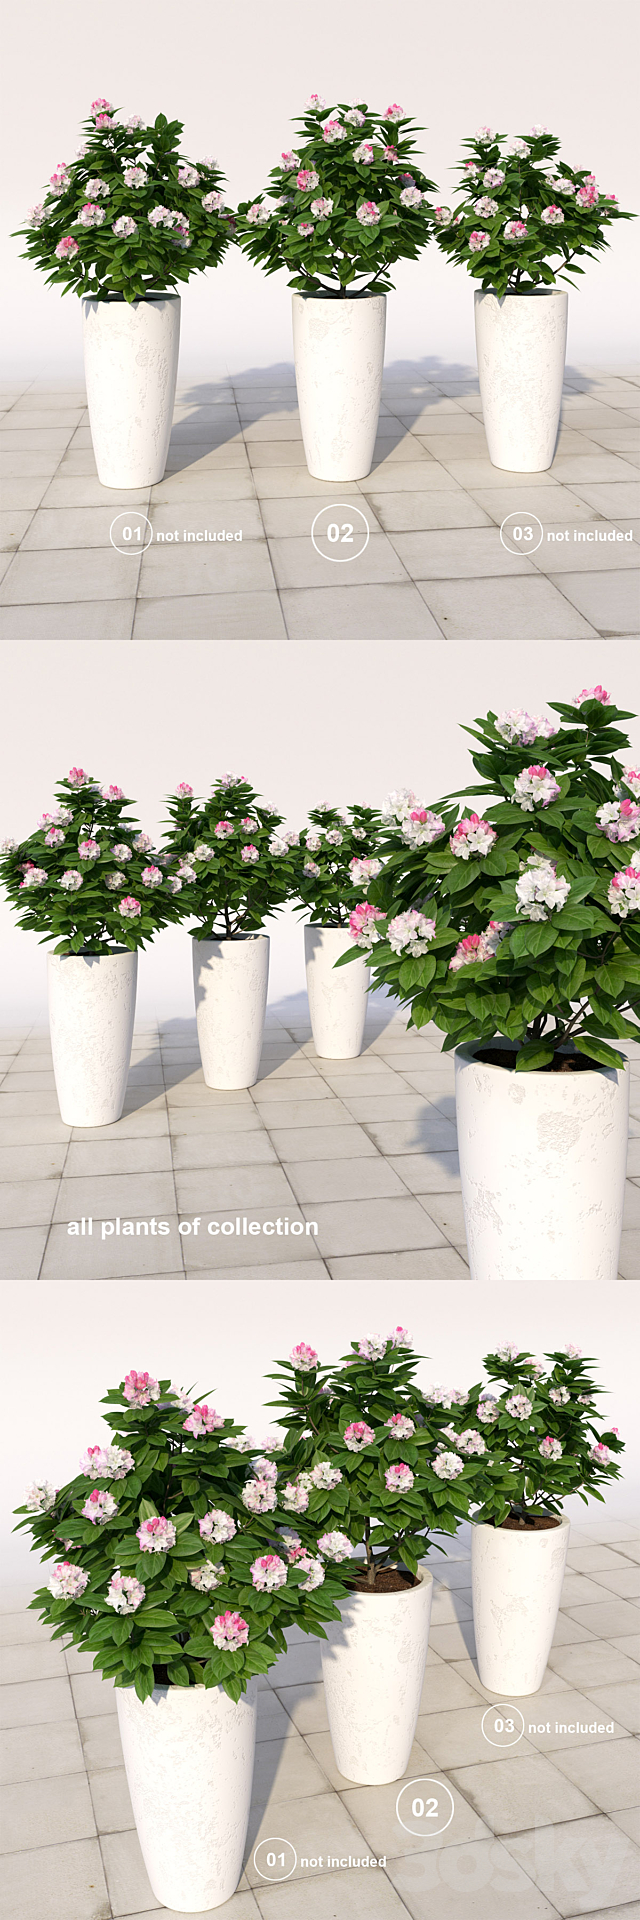 02 Rhododendron blossoming _ Rhododendron 3DSMax File - thumbnail 3